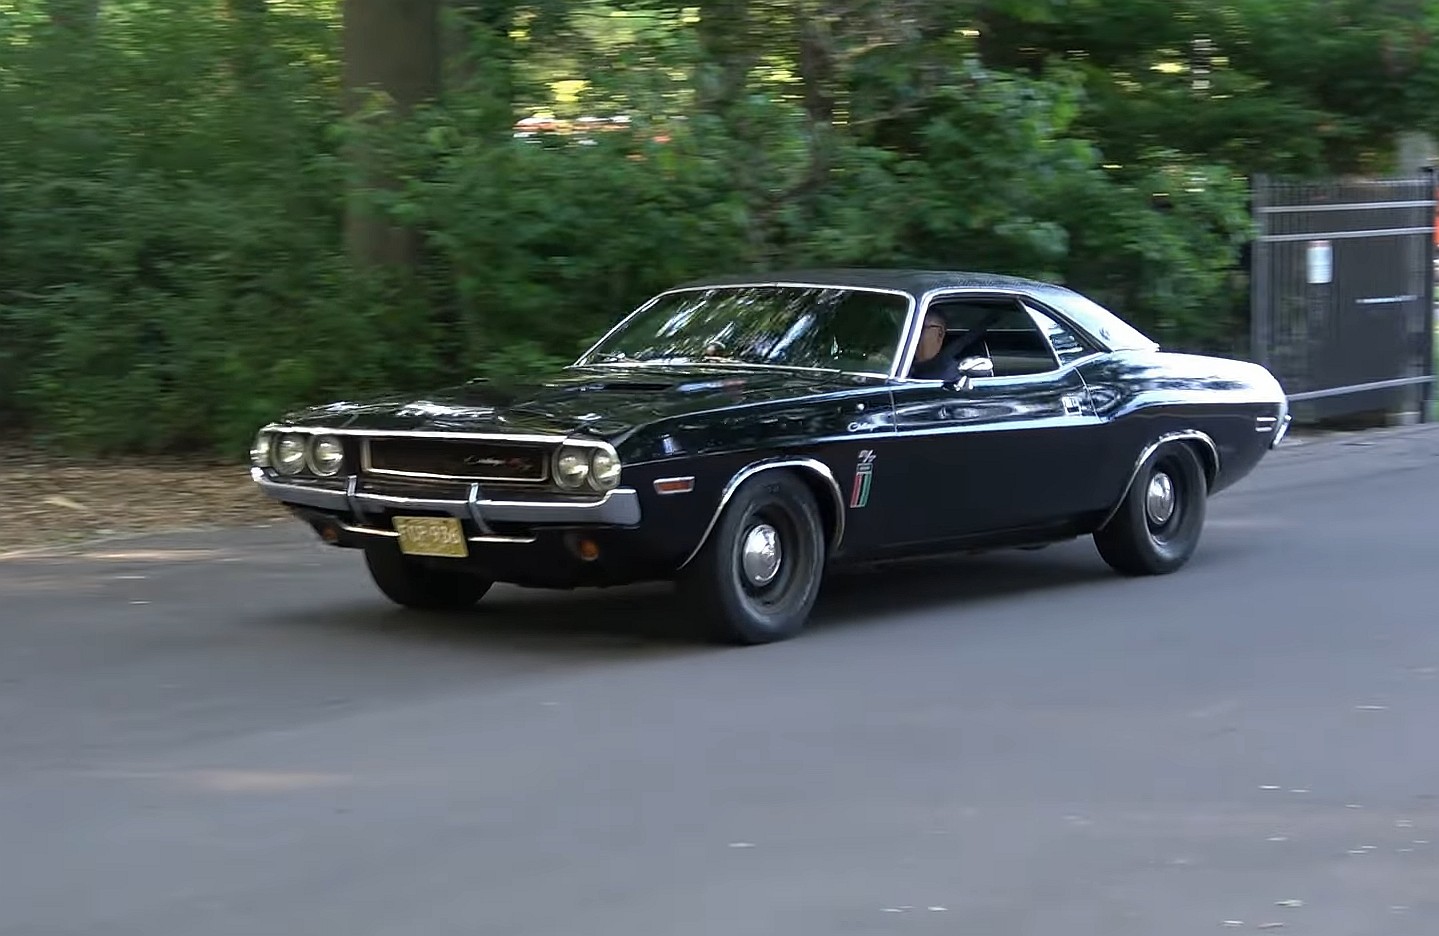 Infamous 1970 Dodge Challenger Black Ghost Shows Up At Car Show